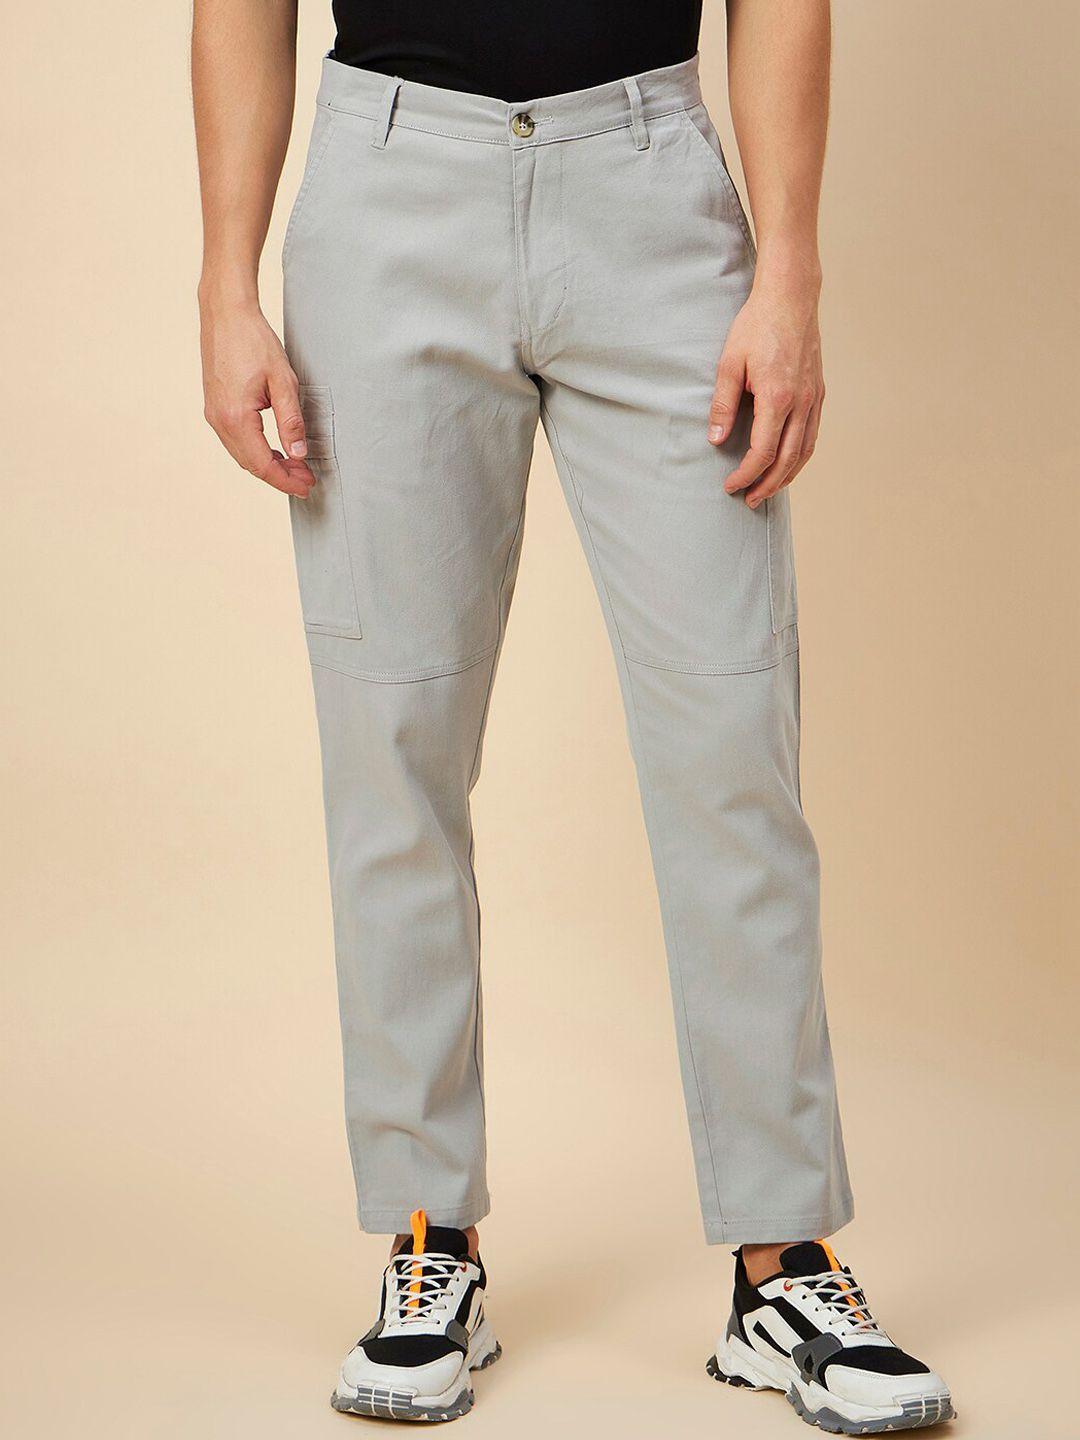 high-star-men-grey-melange-floral-non-iron-chinos-trousers